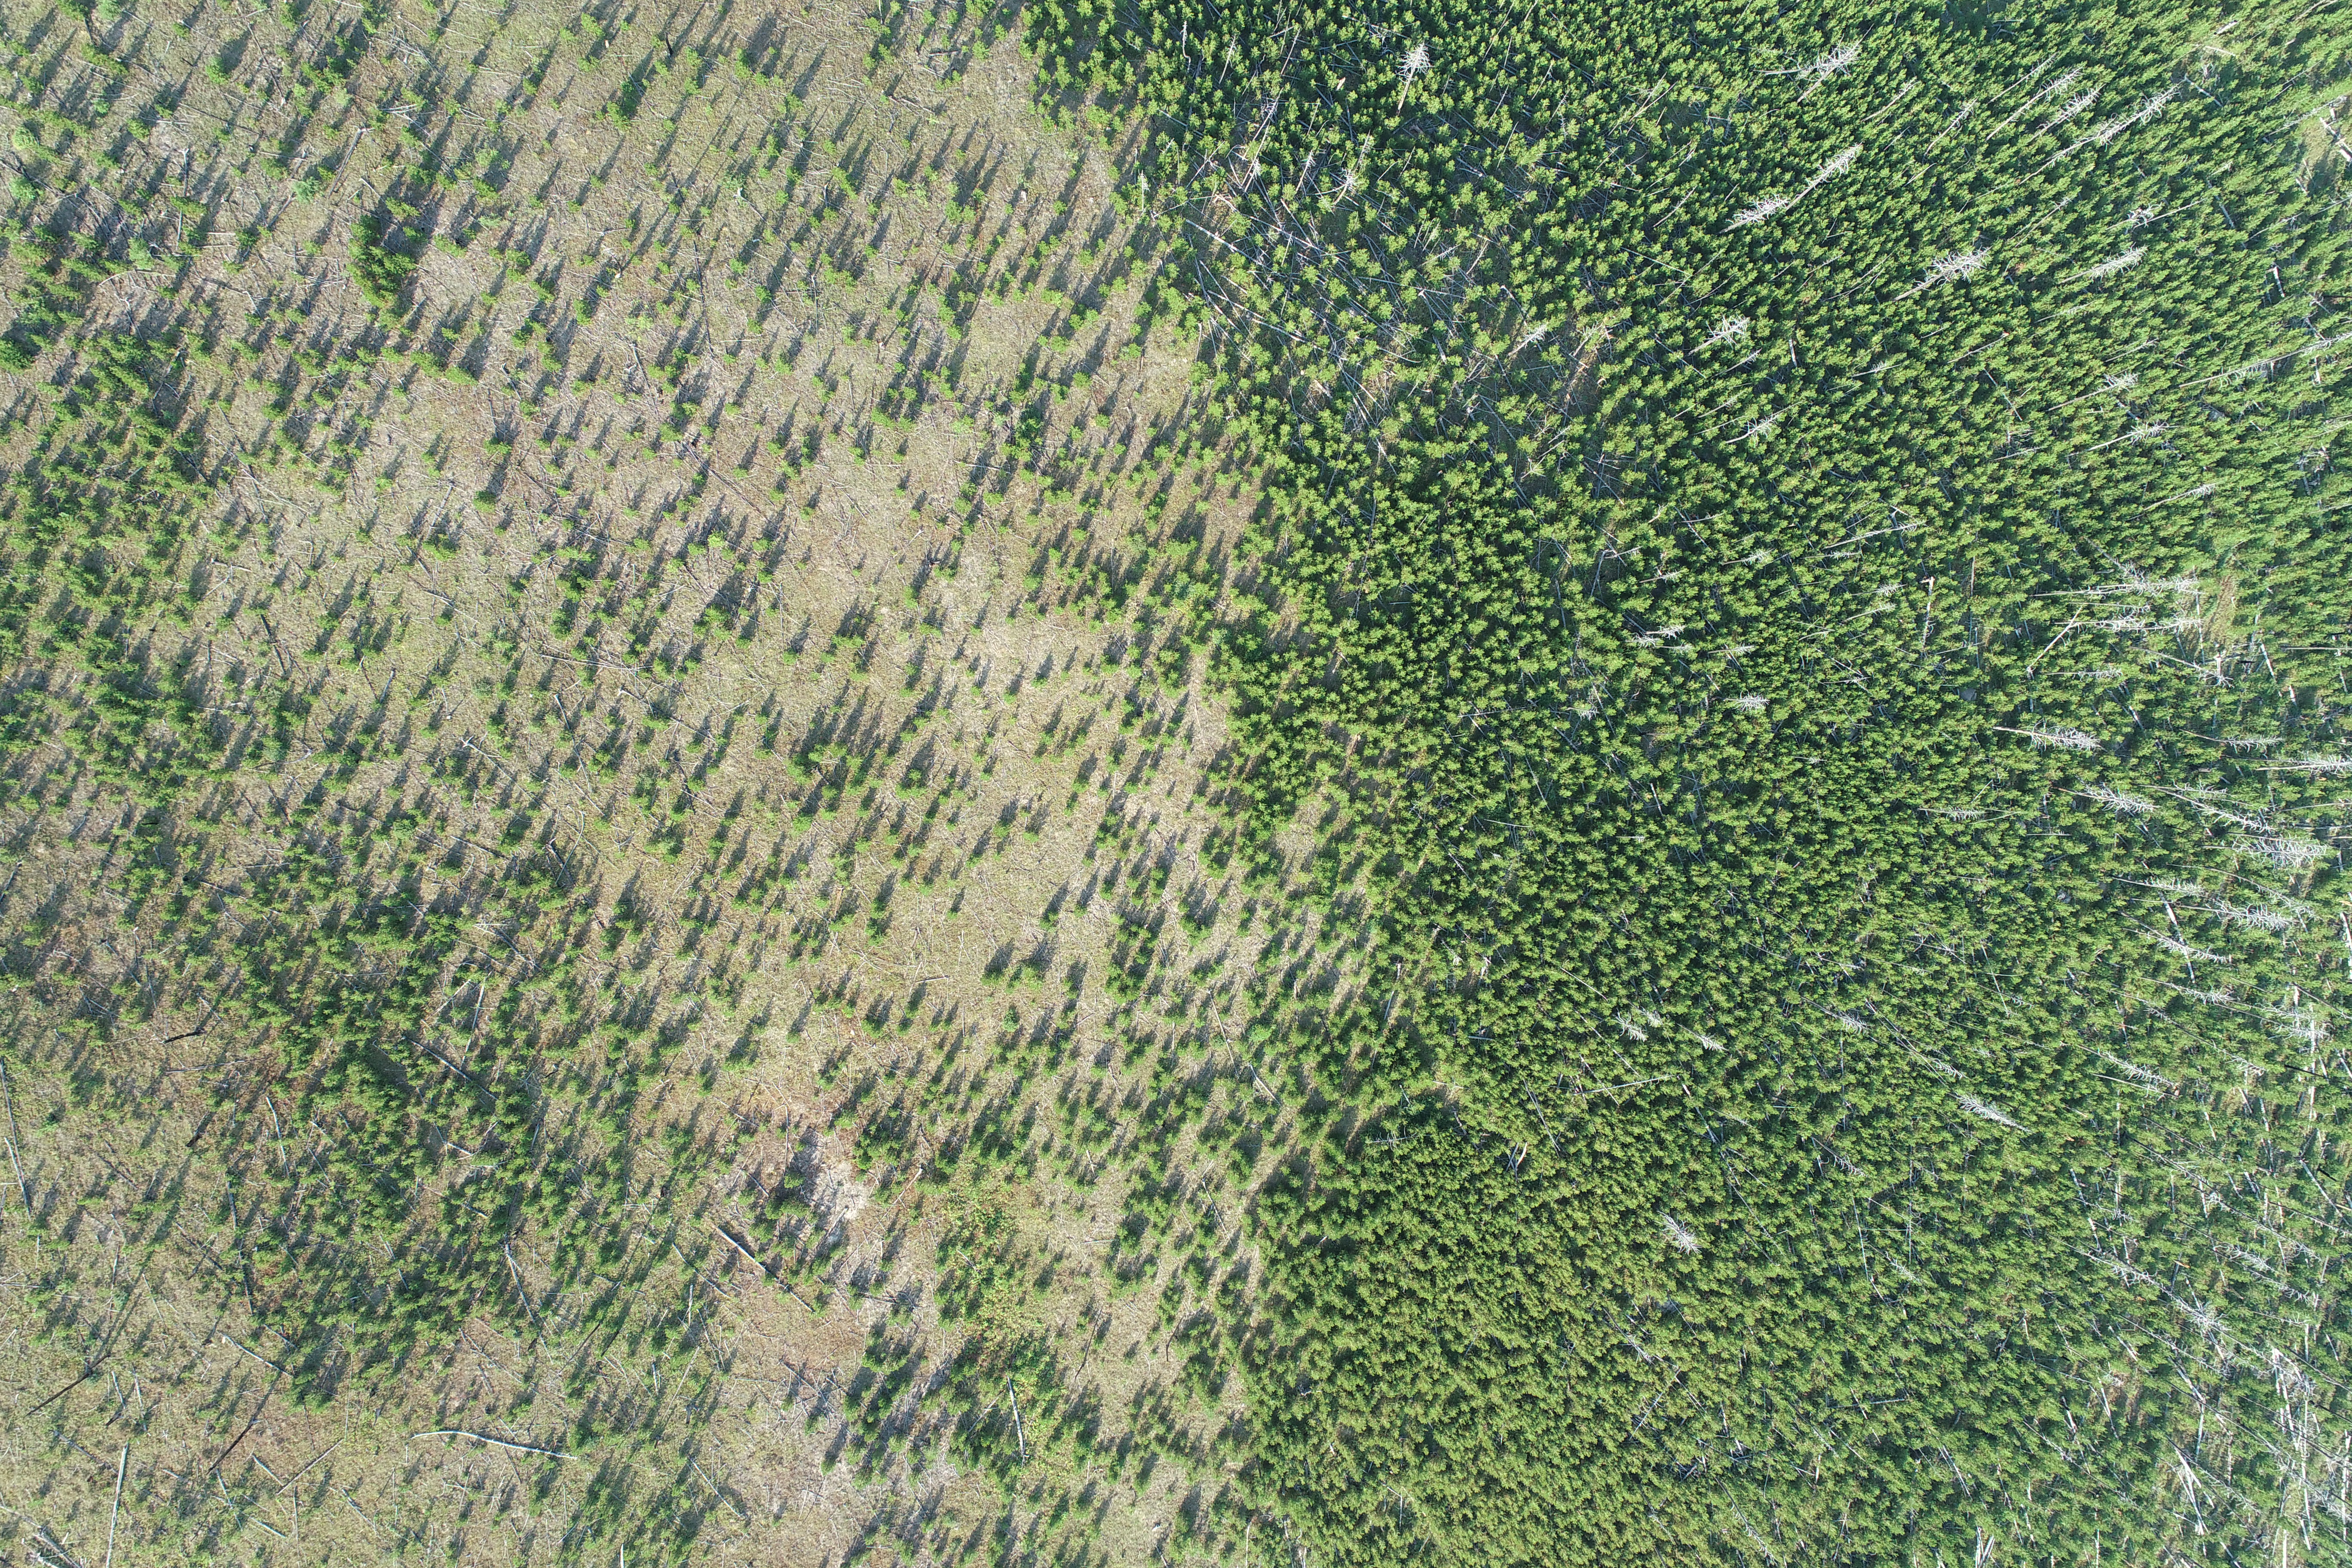 Aerial view of forest recovery after reburn